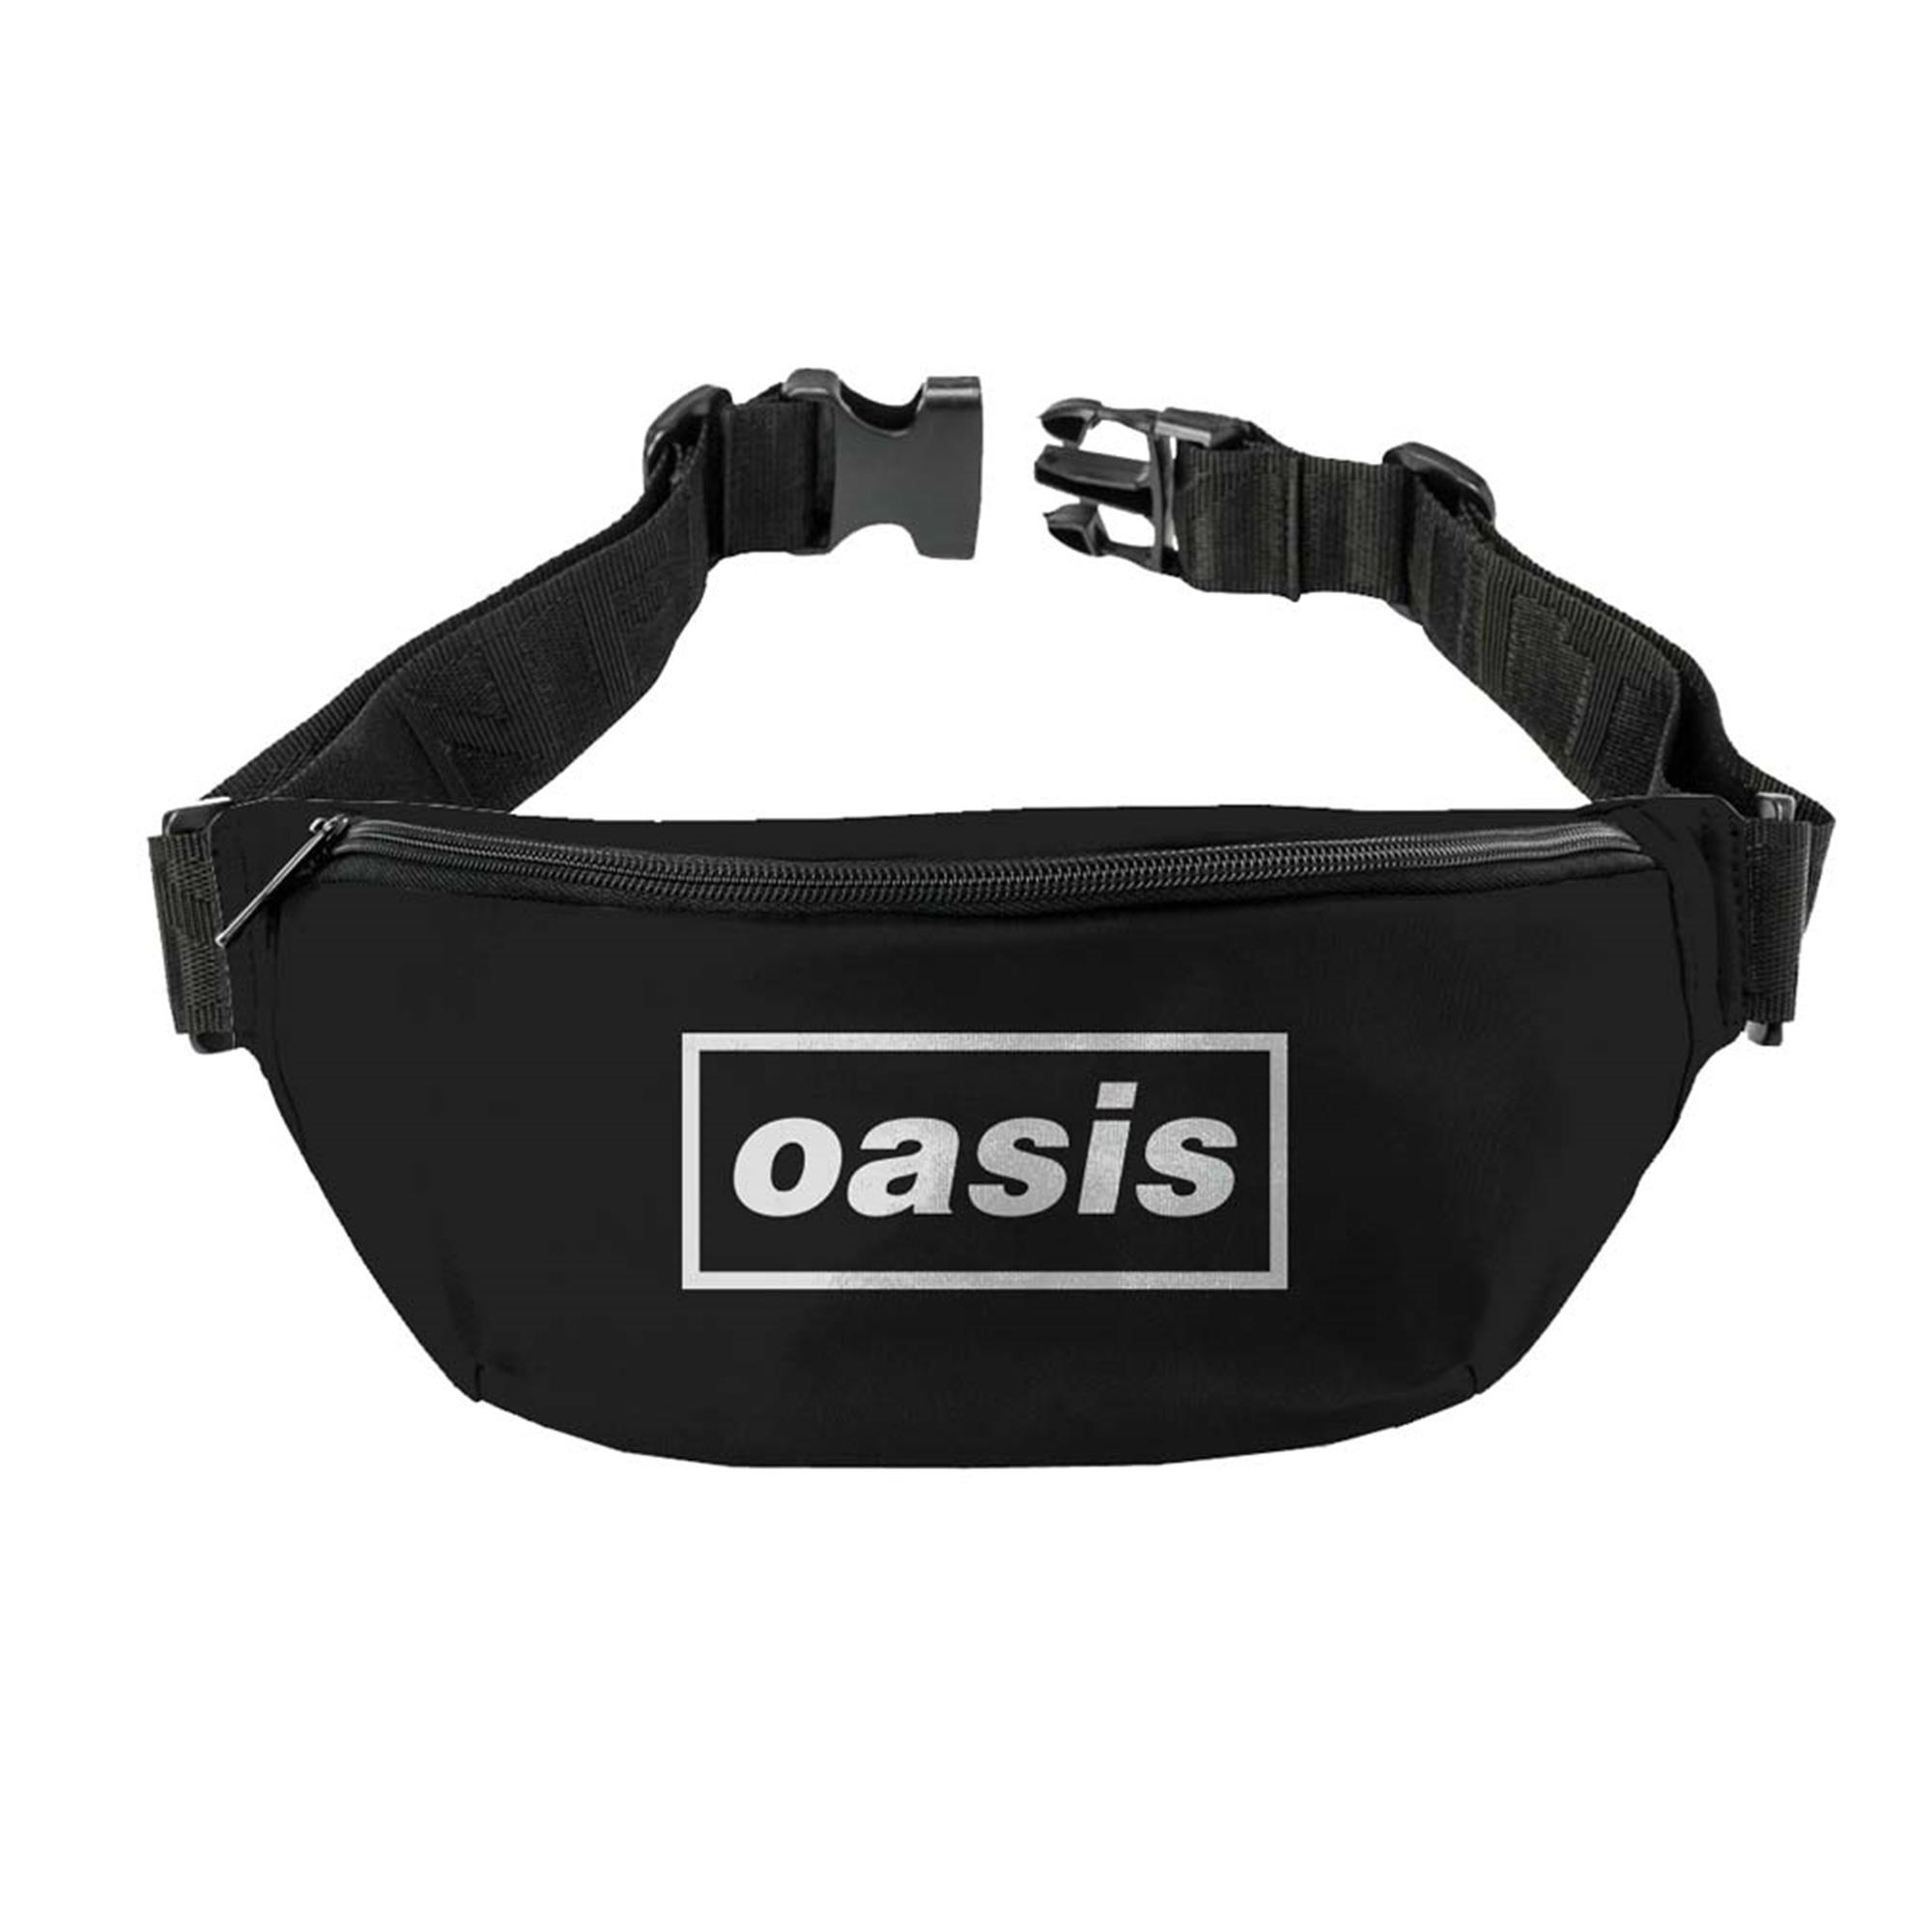 Oasis Fanny Pack